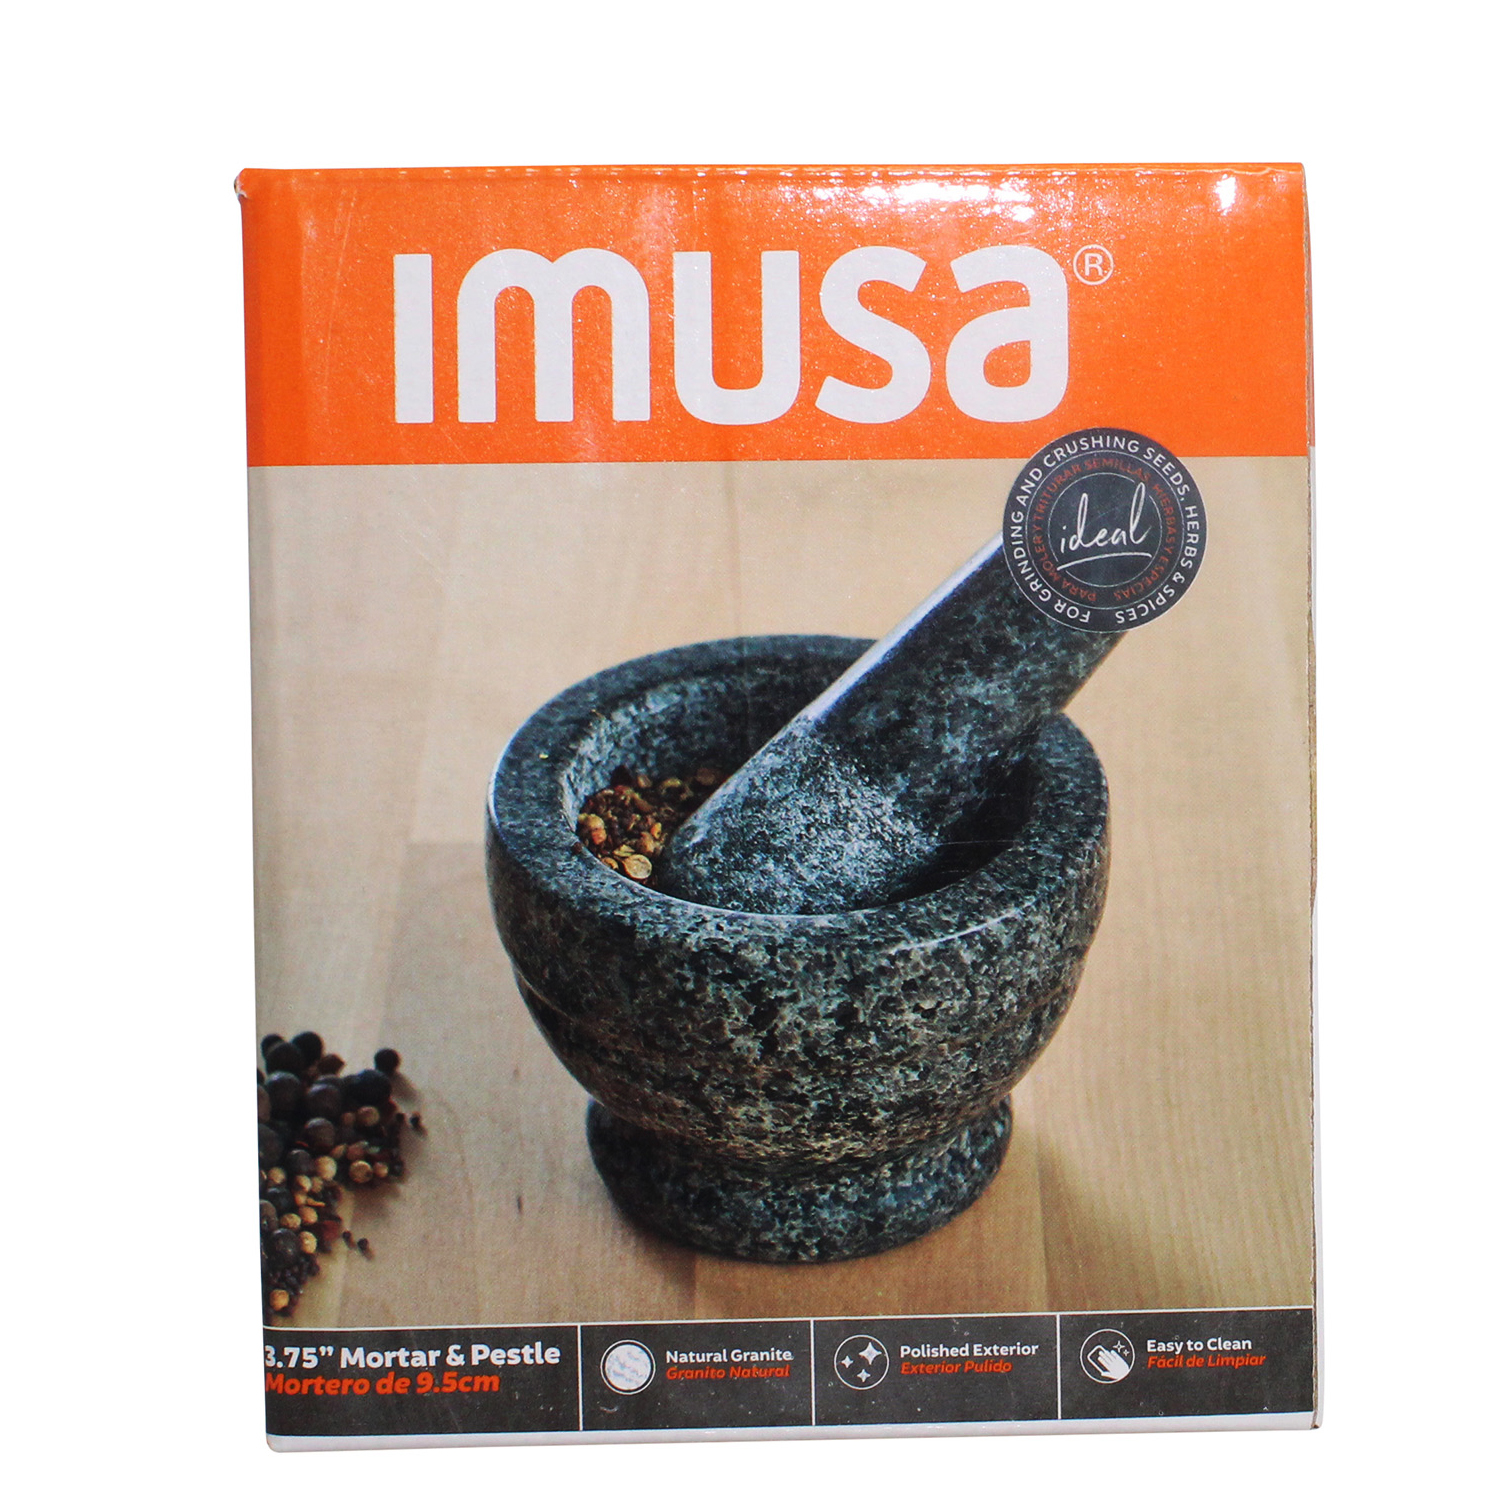 Imusa 3.75 inch Mini Polished Granite Mortar and Pestle for Grinding and Crushing, Gray (3.7" x 3.7" x 2.8") - image 3 of 11